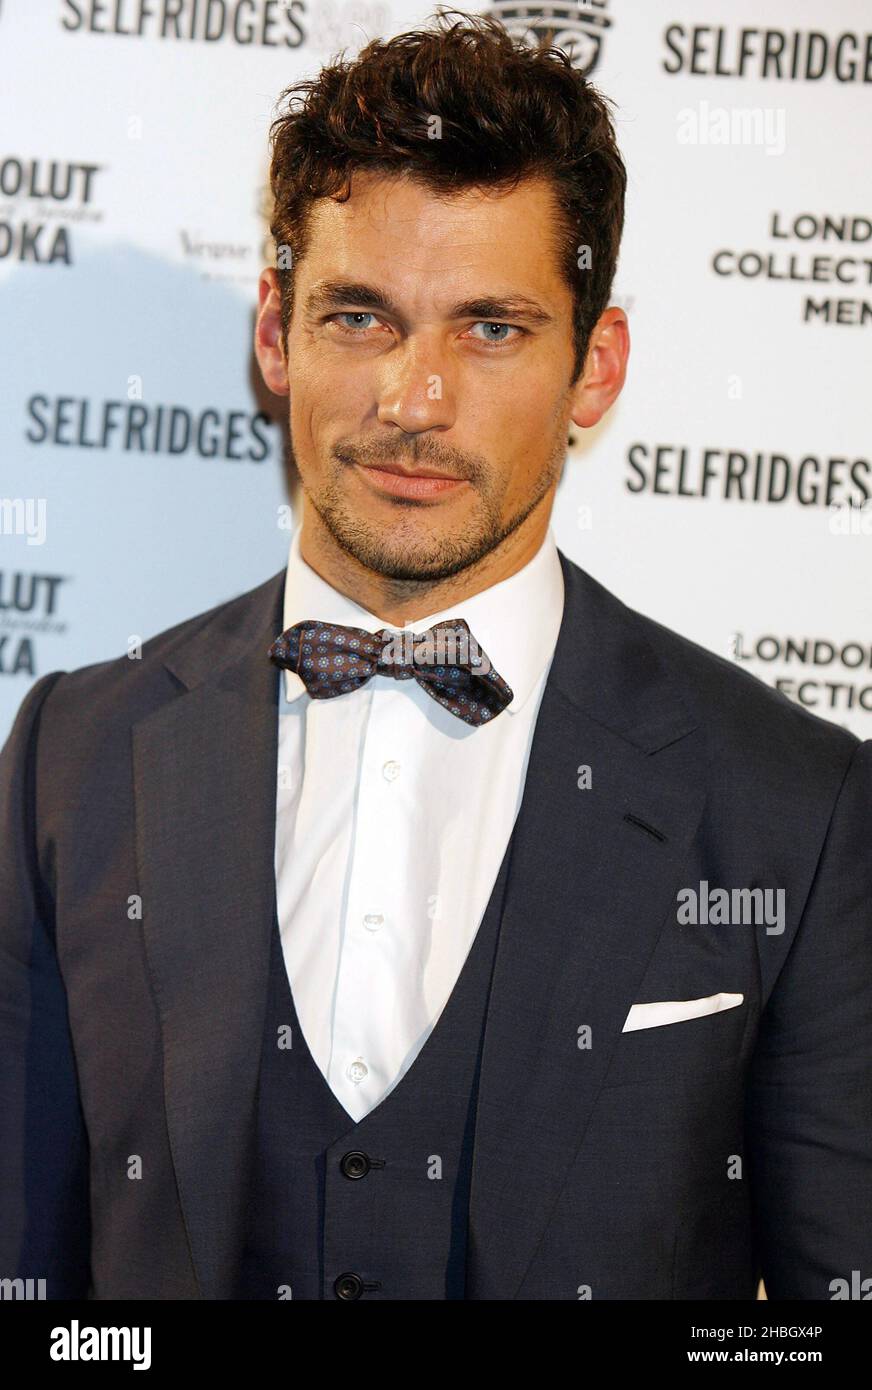 David Gandy arriving at London Collections: Men 2012 Selfridges and Disturbing London Event hosted by Tinie Tempah in Central London. Stock Photo